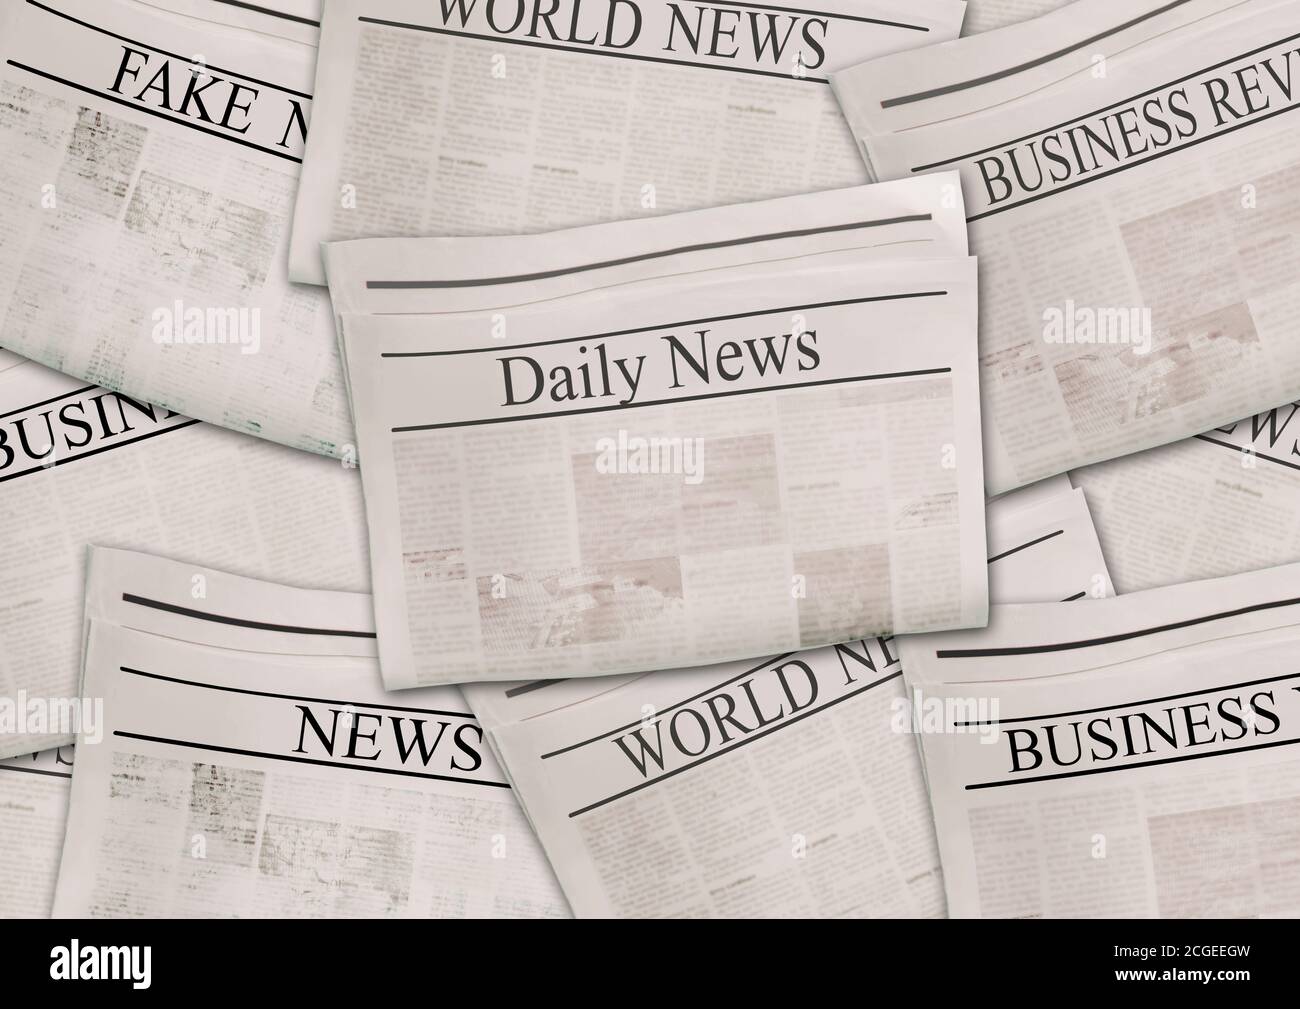 Newspapers With Headlines On Horizontal Surface Old Newspaper Background Aged News Pages Texture Gray White Black Paper Collage Top View Stock Photo Alamy